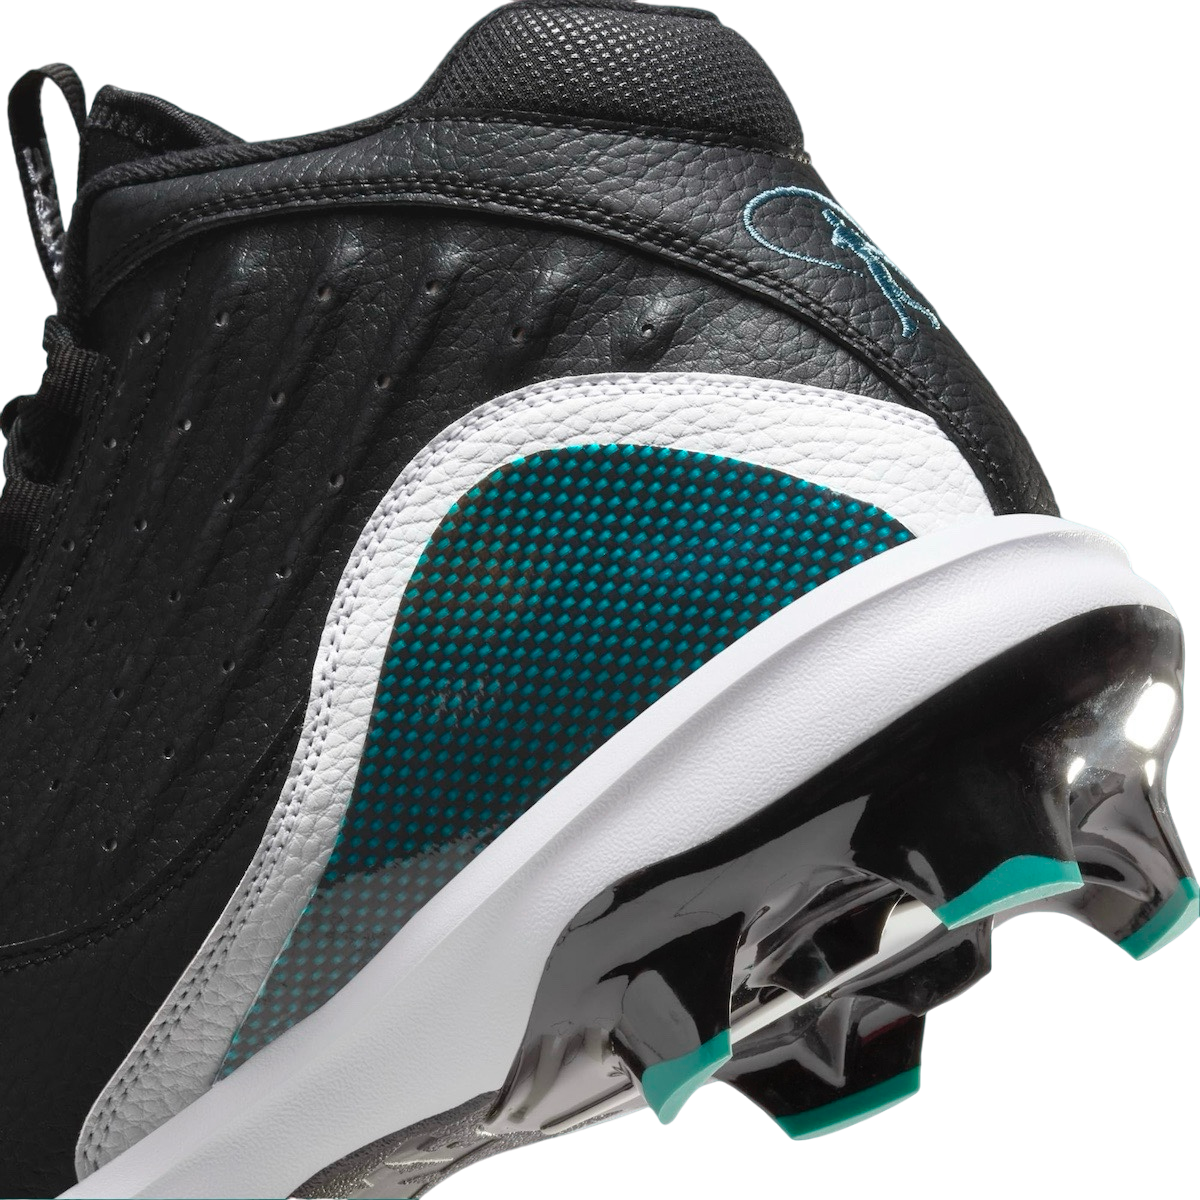 Nike Griffey 2 MCS Cleat Freshwater